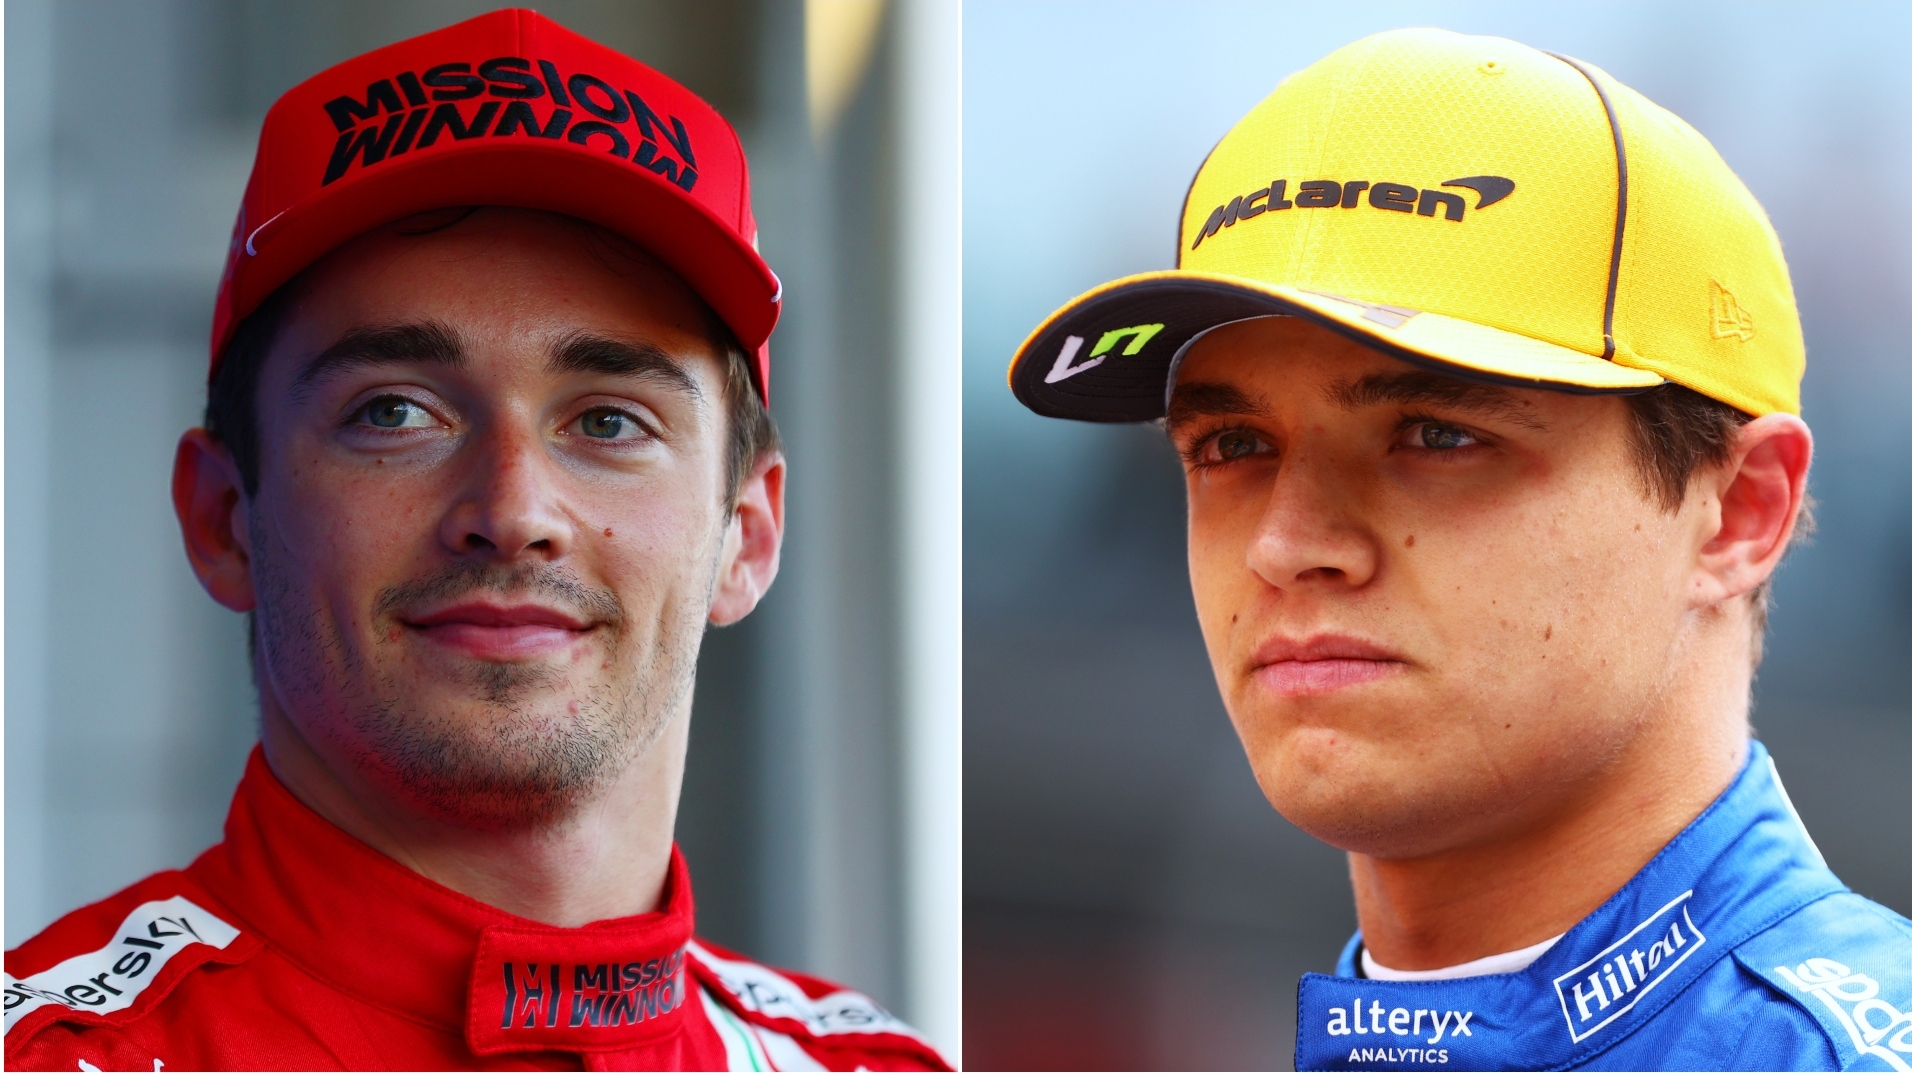 Who is favourite for 3rd in the constructor standings?